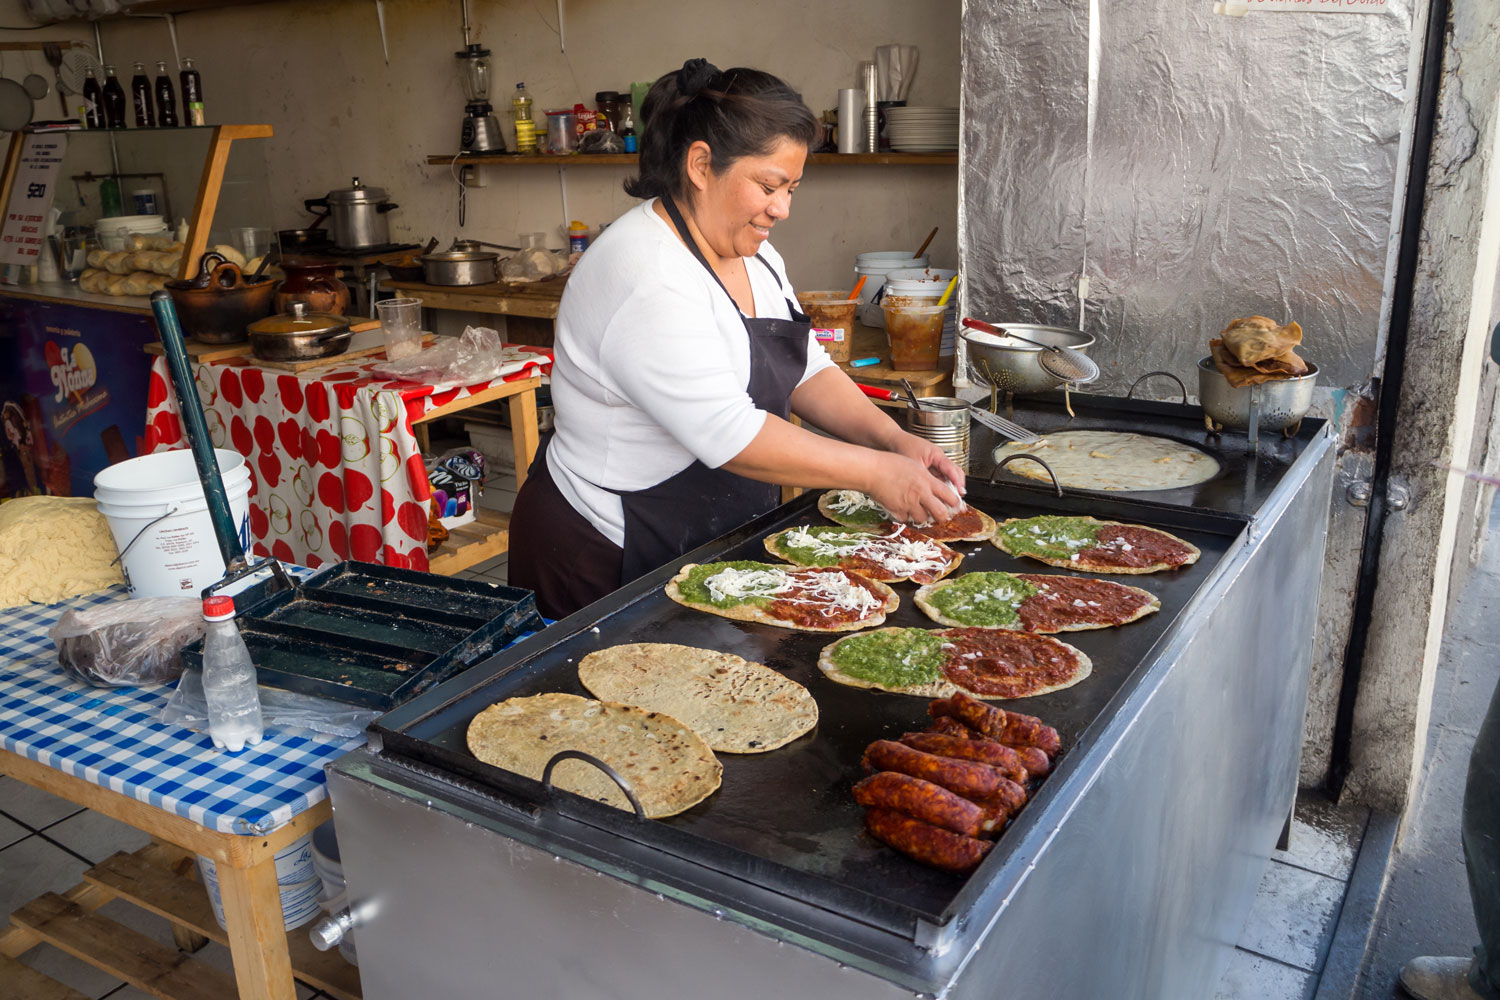 A Mexican woman making quesadillas at her kitchen